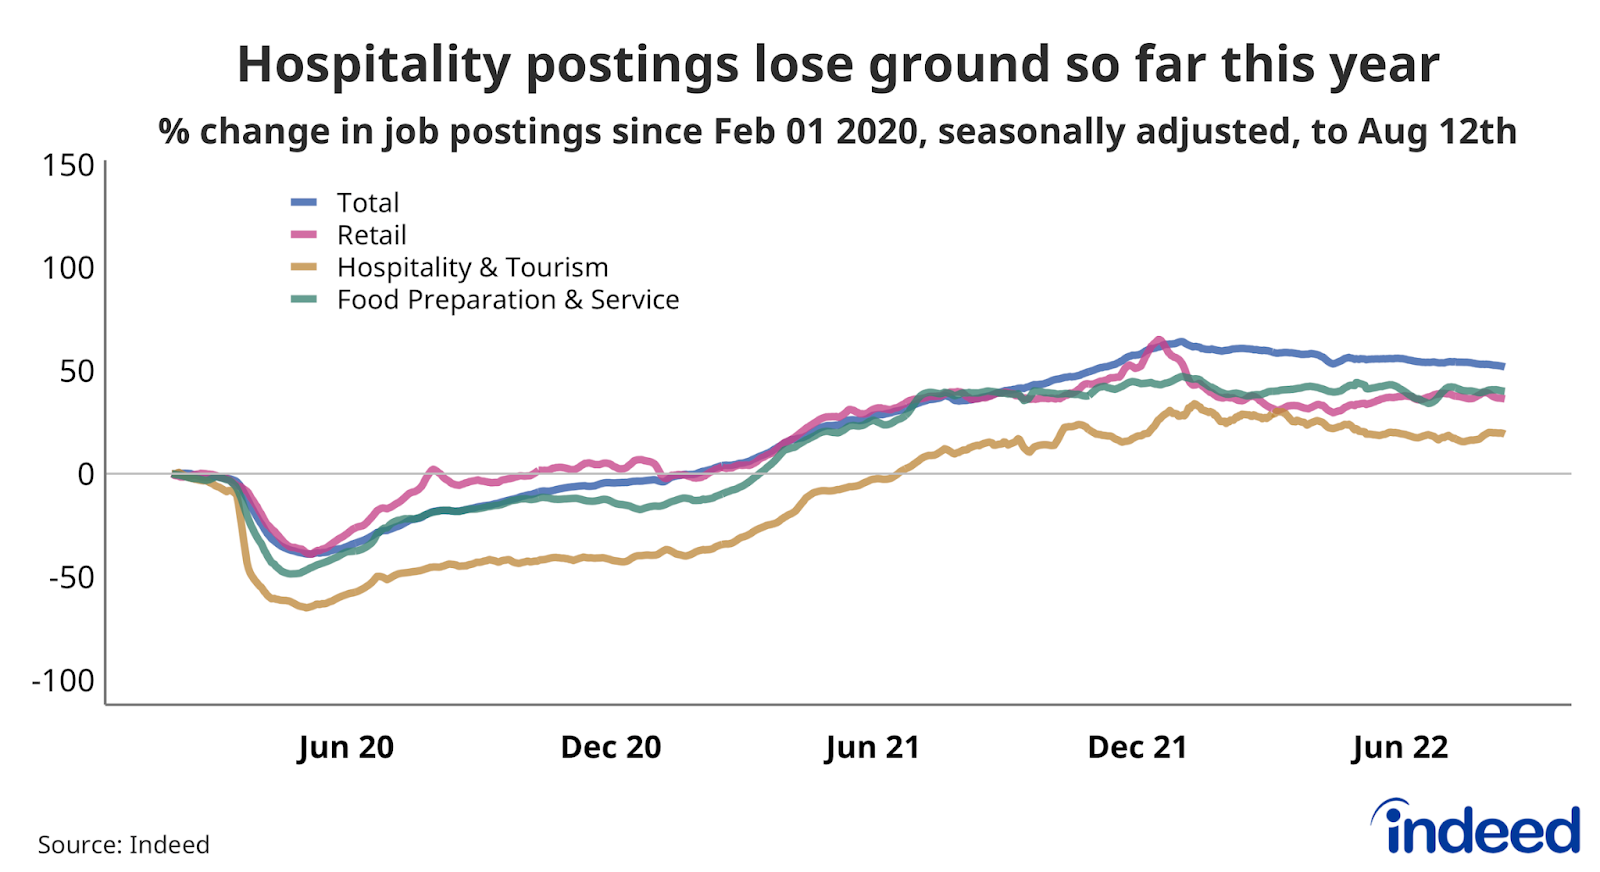 Line chart showing job postings in Retail, Hospitality & Tourism, and Food Preparation & Service, seasonally adjusted, to Aug 12th. 